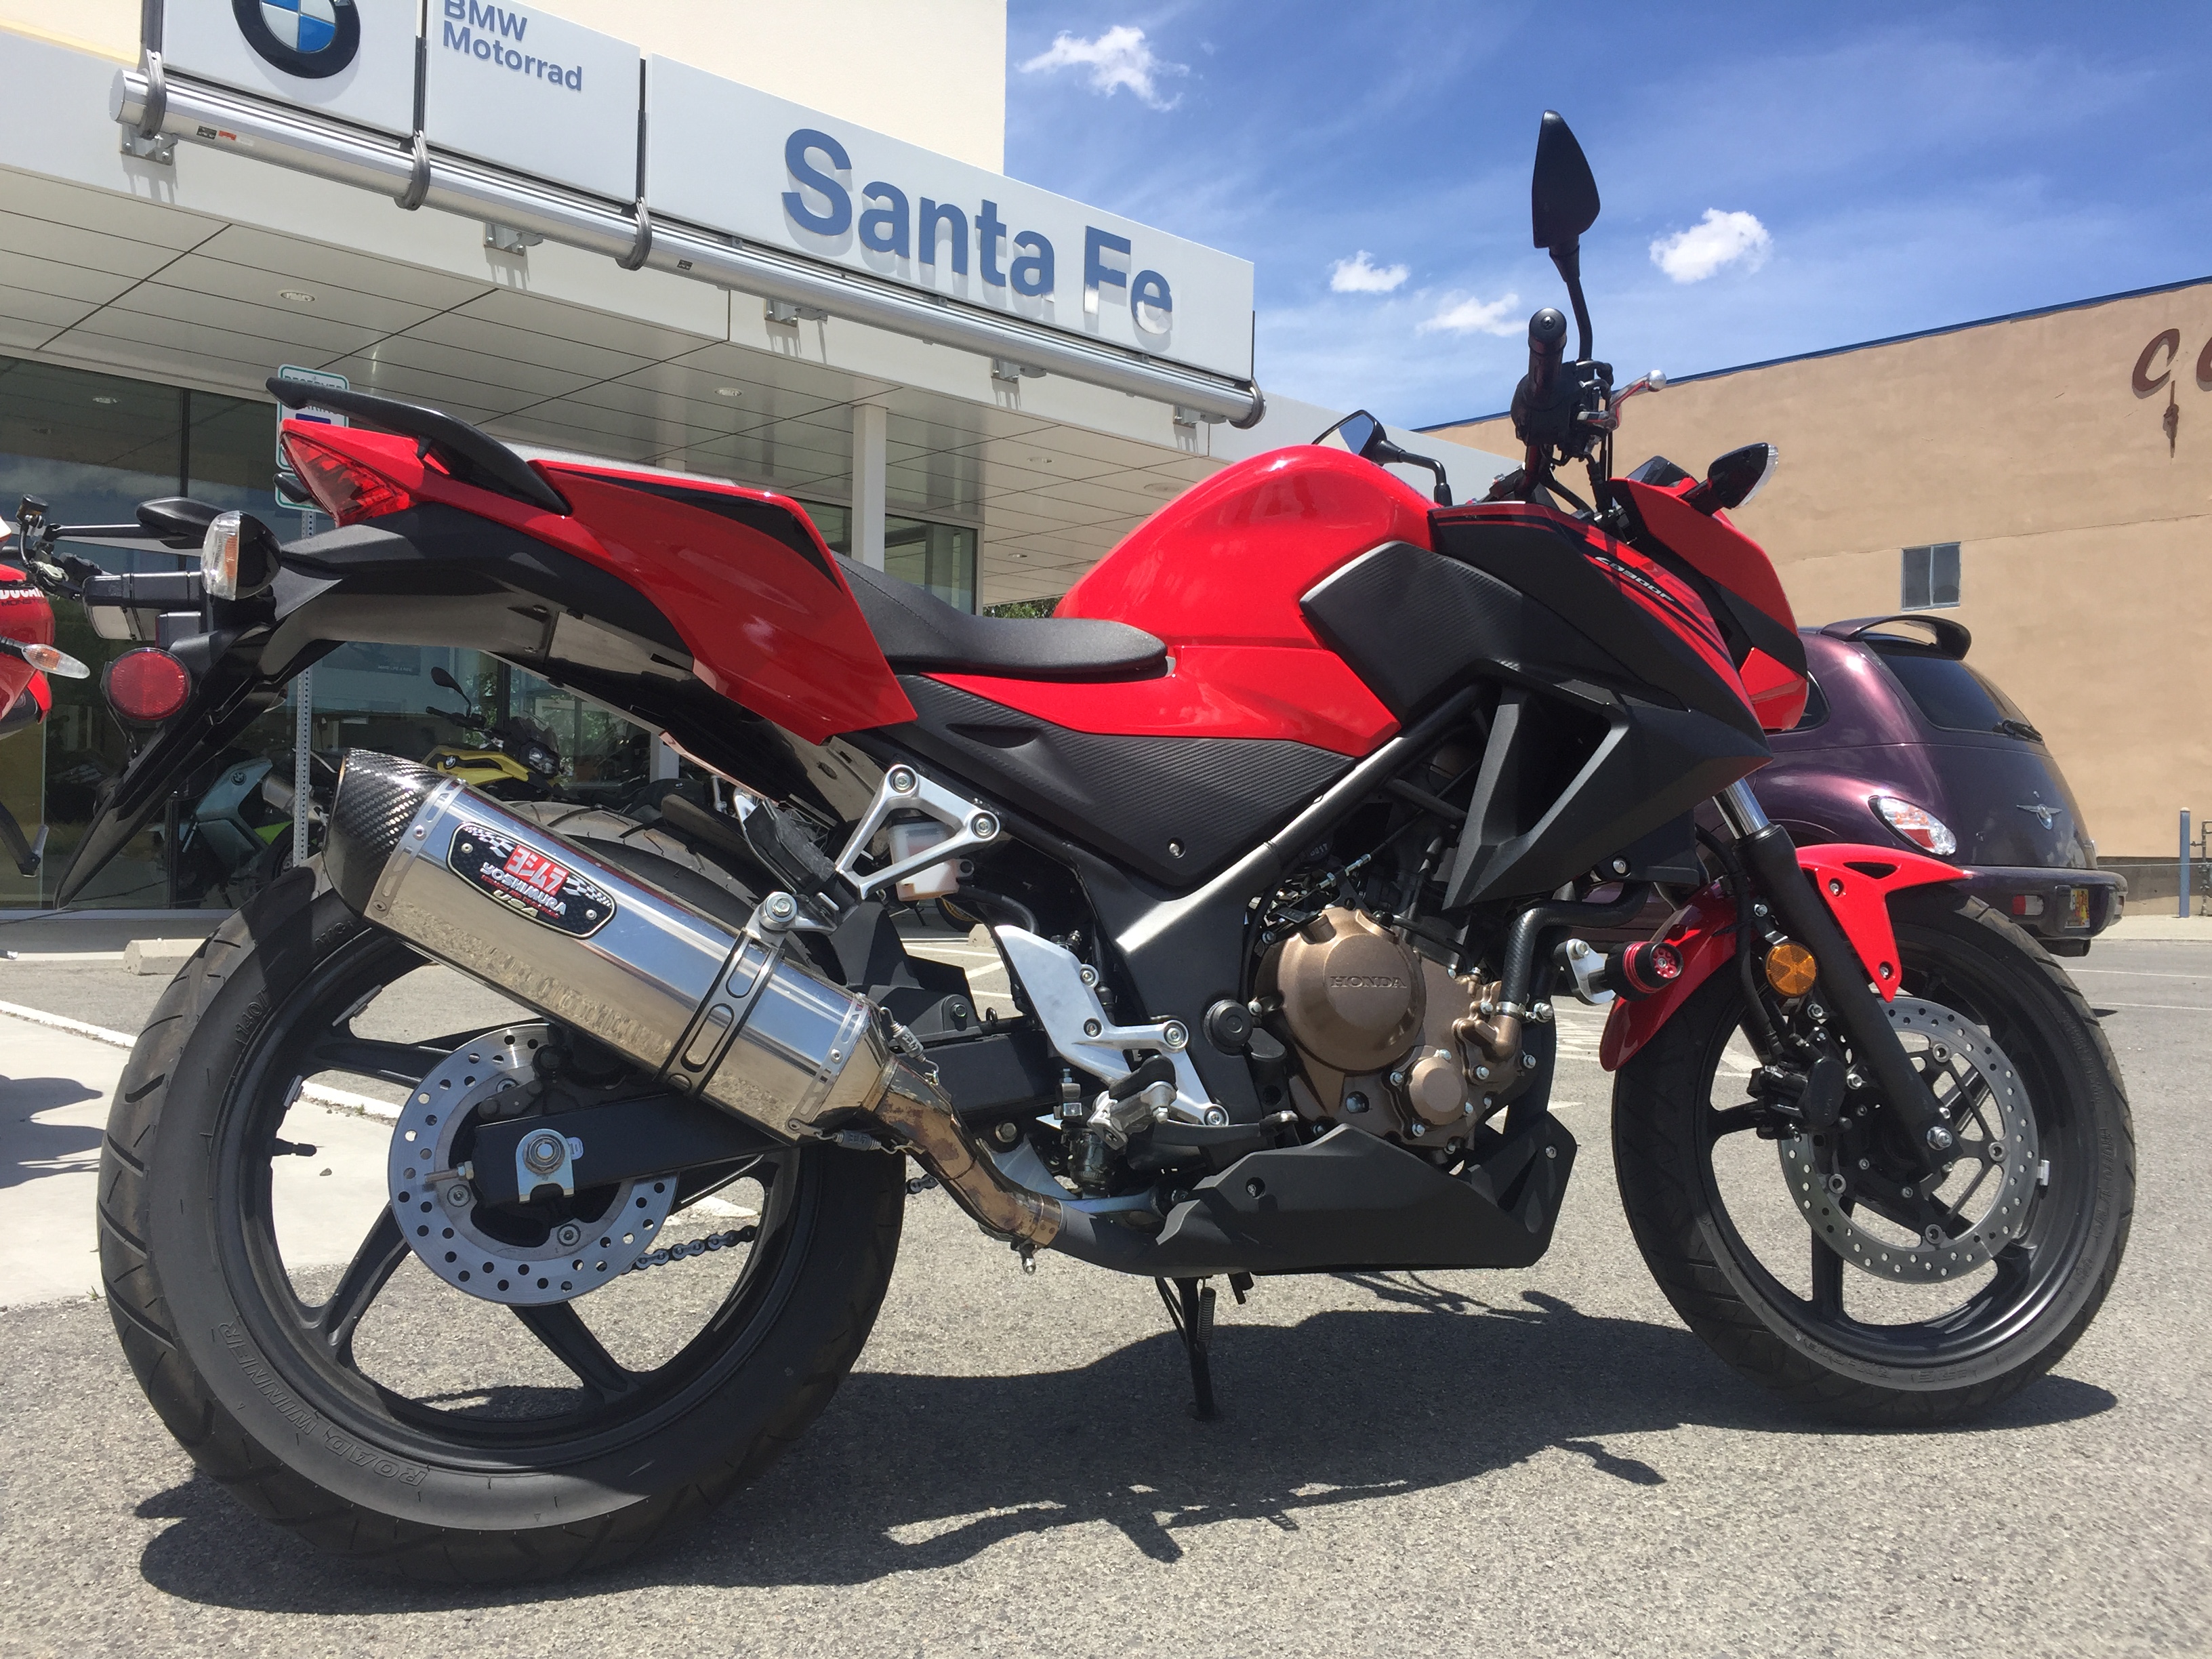 Pre-Owned Motorcycle Inventory - CB300F - Santa Fe BMW Motorcycles